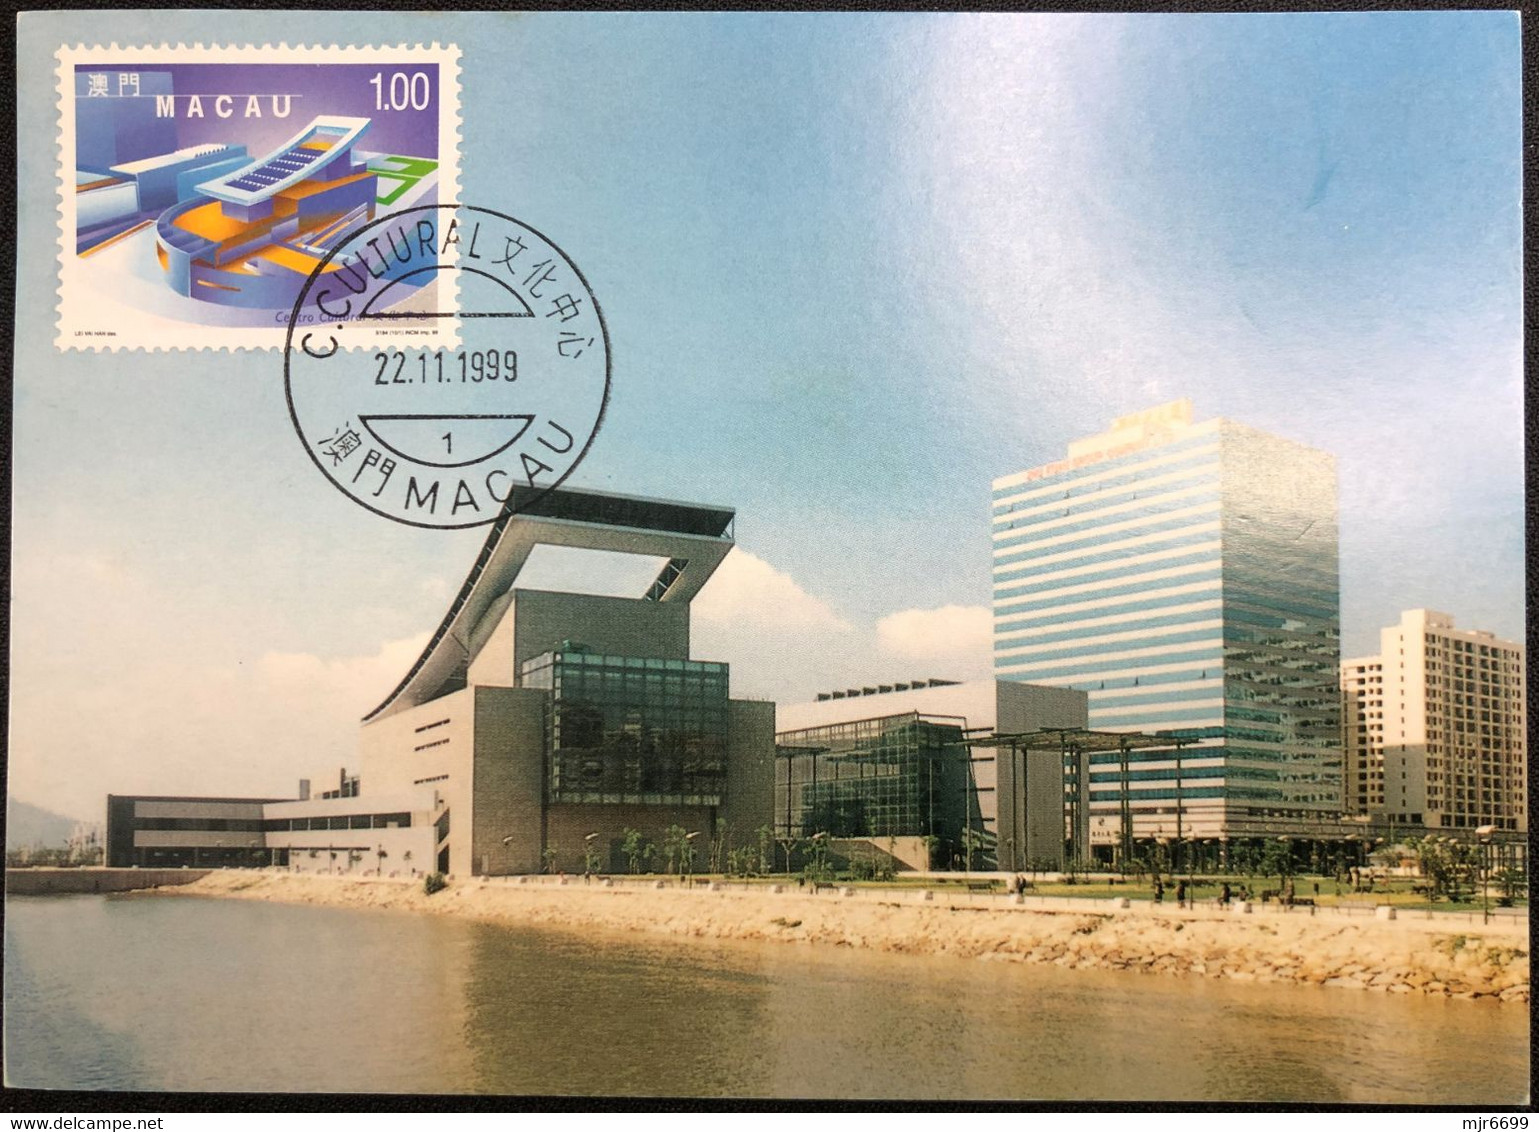 MACAU 1999 CULTURAL CENTRE MAX CARD (FIRST DAY WORK OF THE POST OFFICE IN THIS CENTRE) - Tarjetas – Máxima